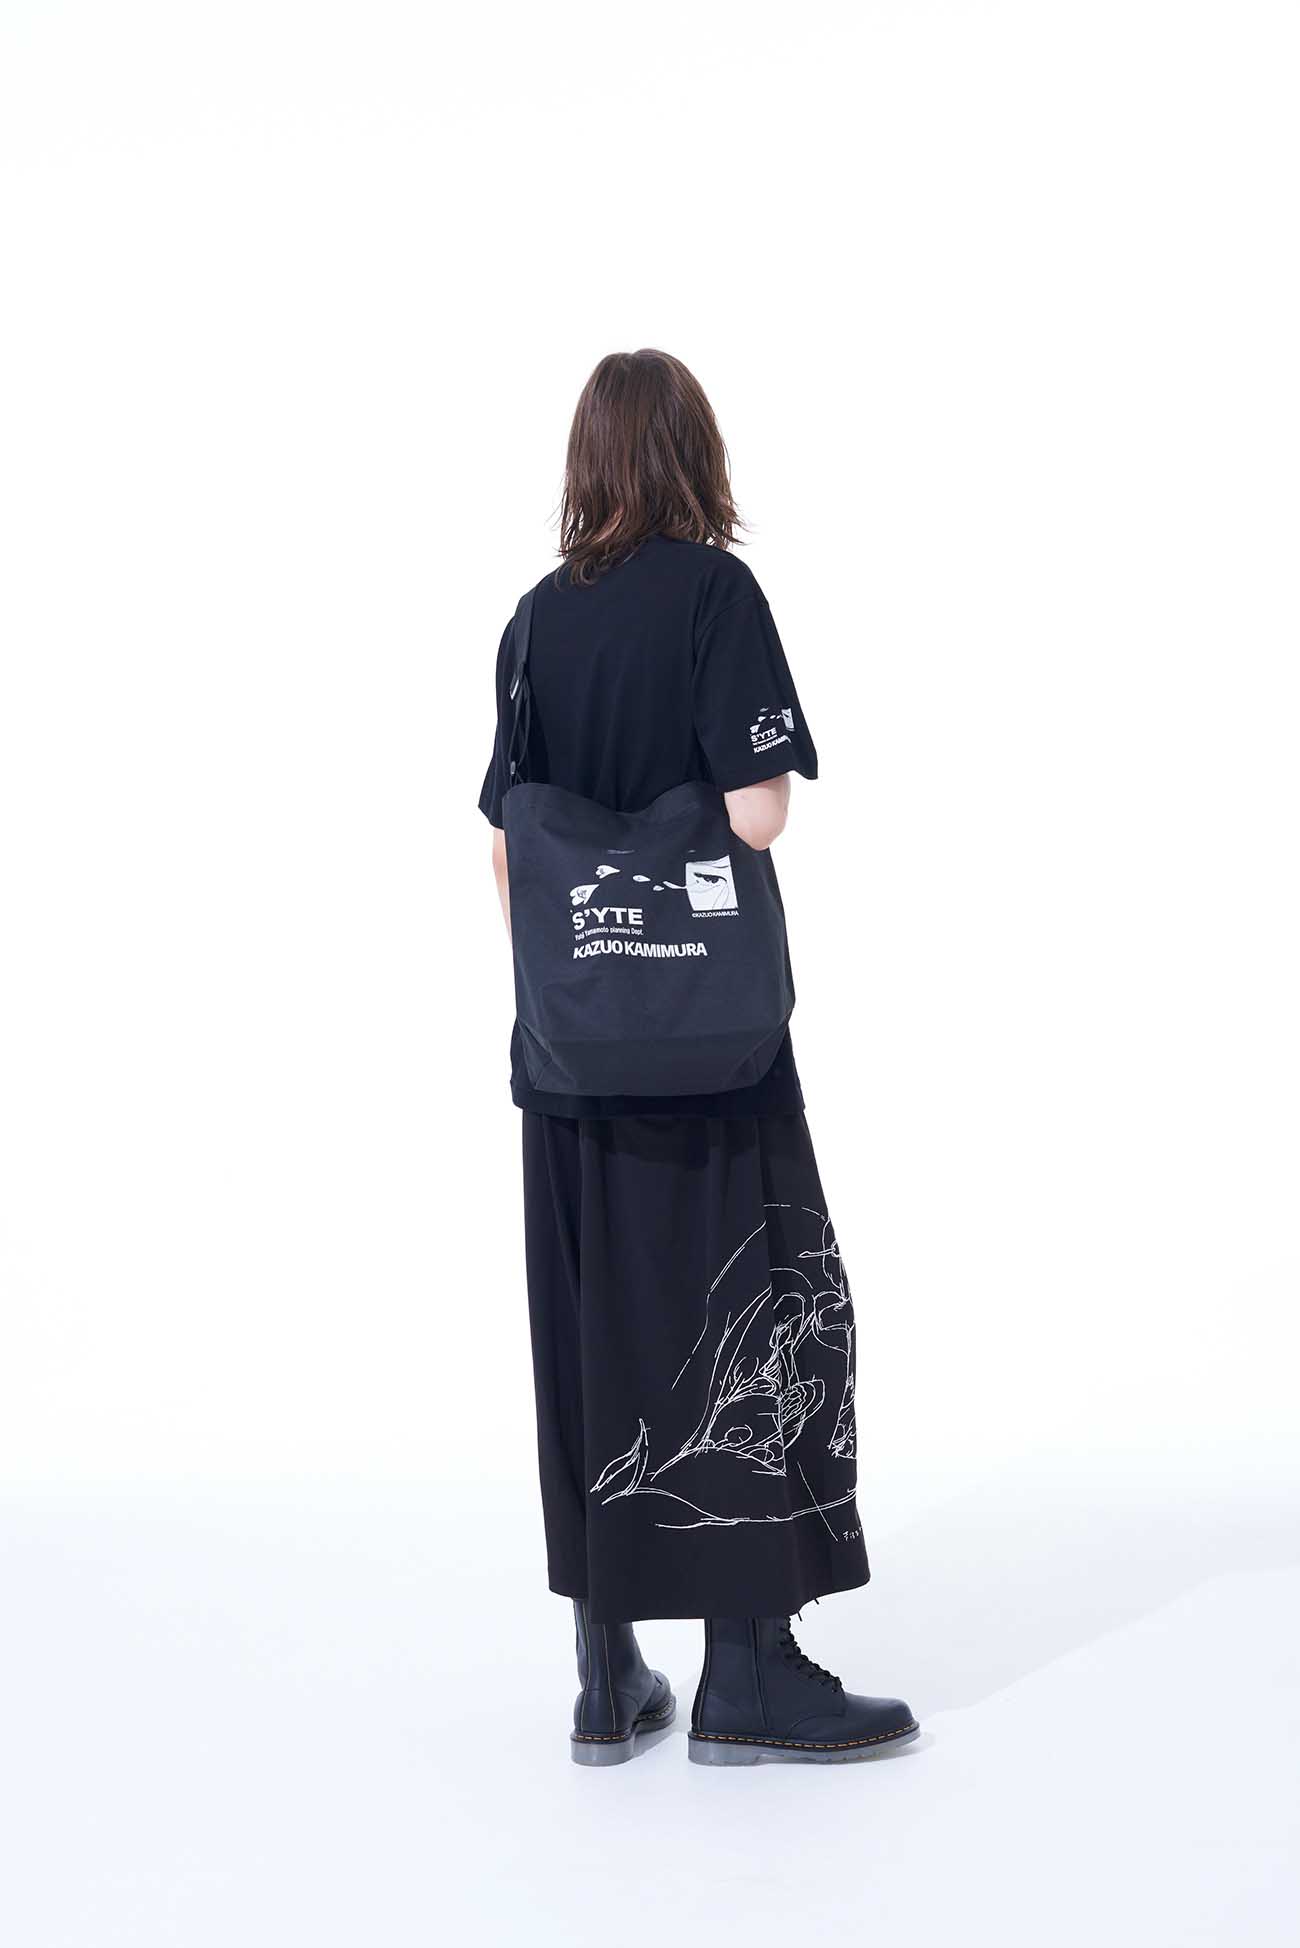 S’YTE x KAZUO KAMIMURA-同棲時代 & MAGAZINE COVER ART-SHOULDER BAG WITH PRINTED ILLUSTRATIONS